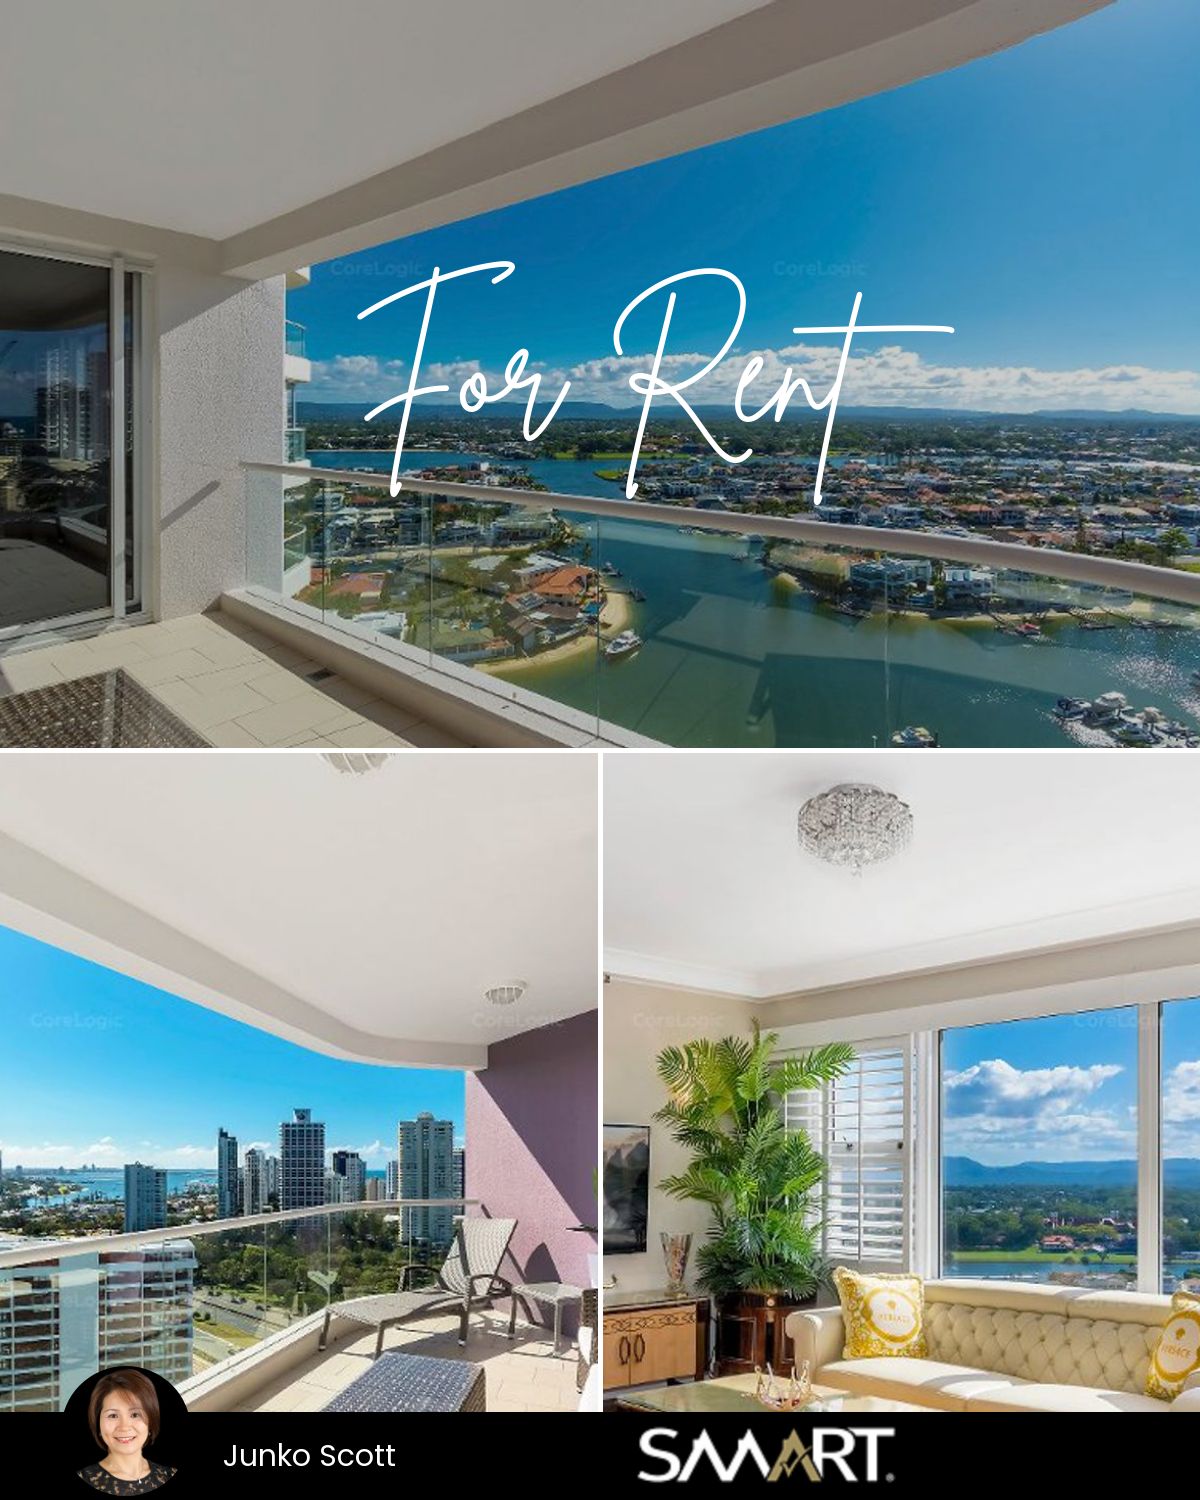 123/12 Commodore Drive, Surfers Paradise, QLD 4217 | Realty.com.au